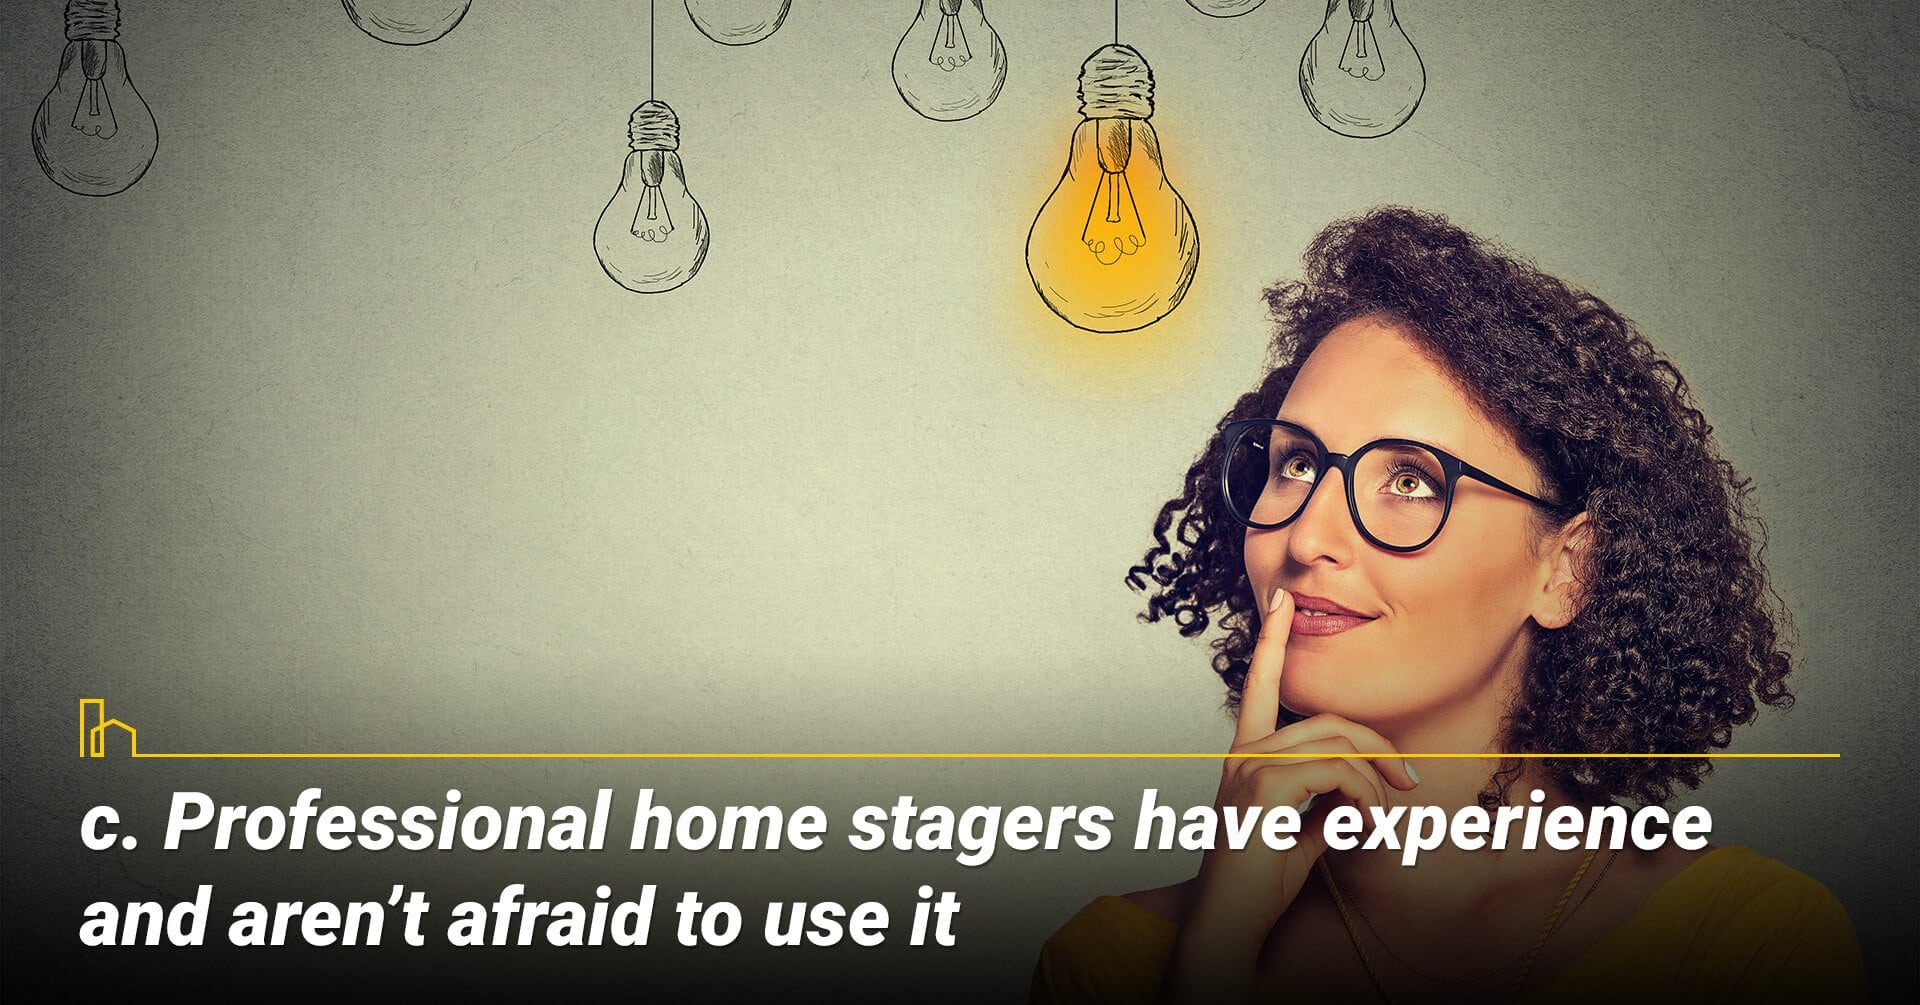 Professional home stagers have experience and aren’t afraid to use it, Professional home stagers get it right